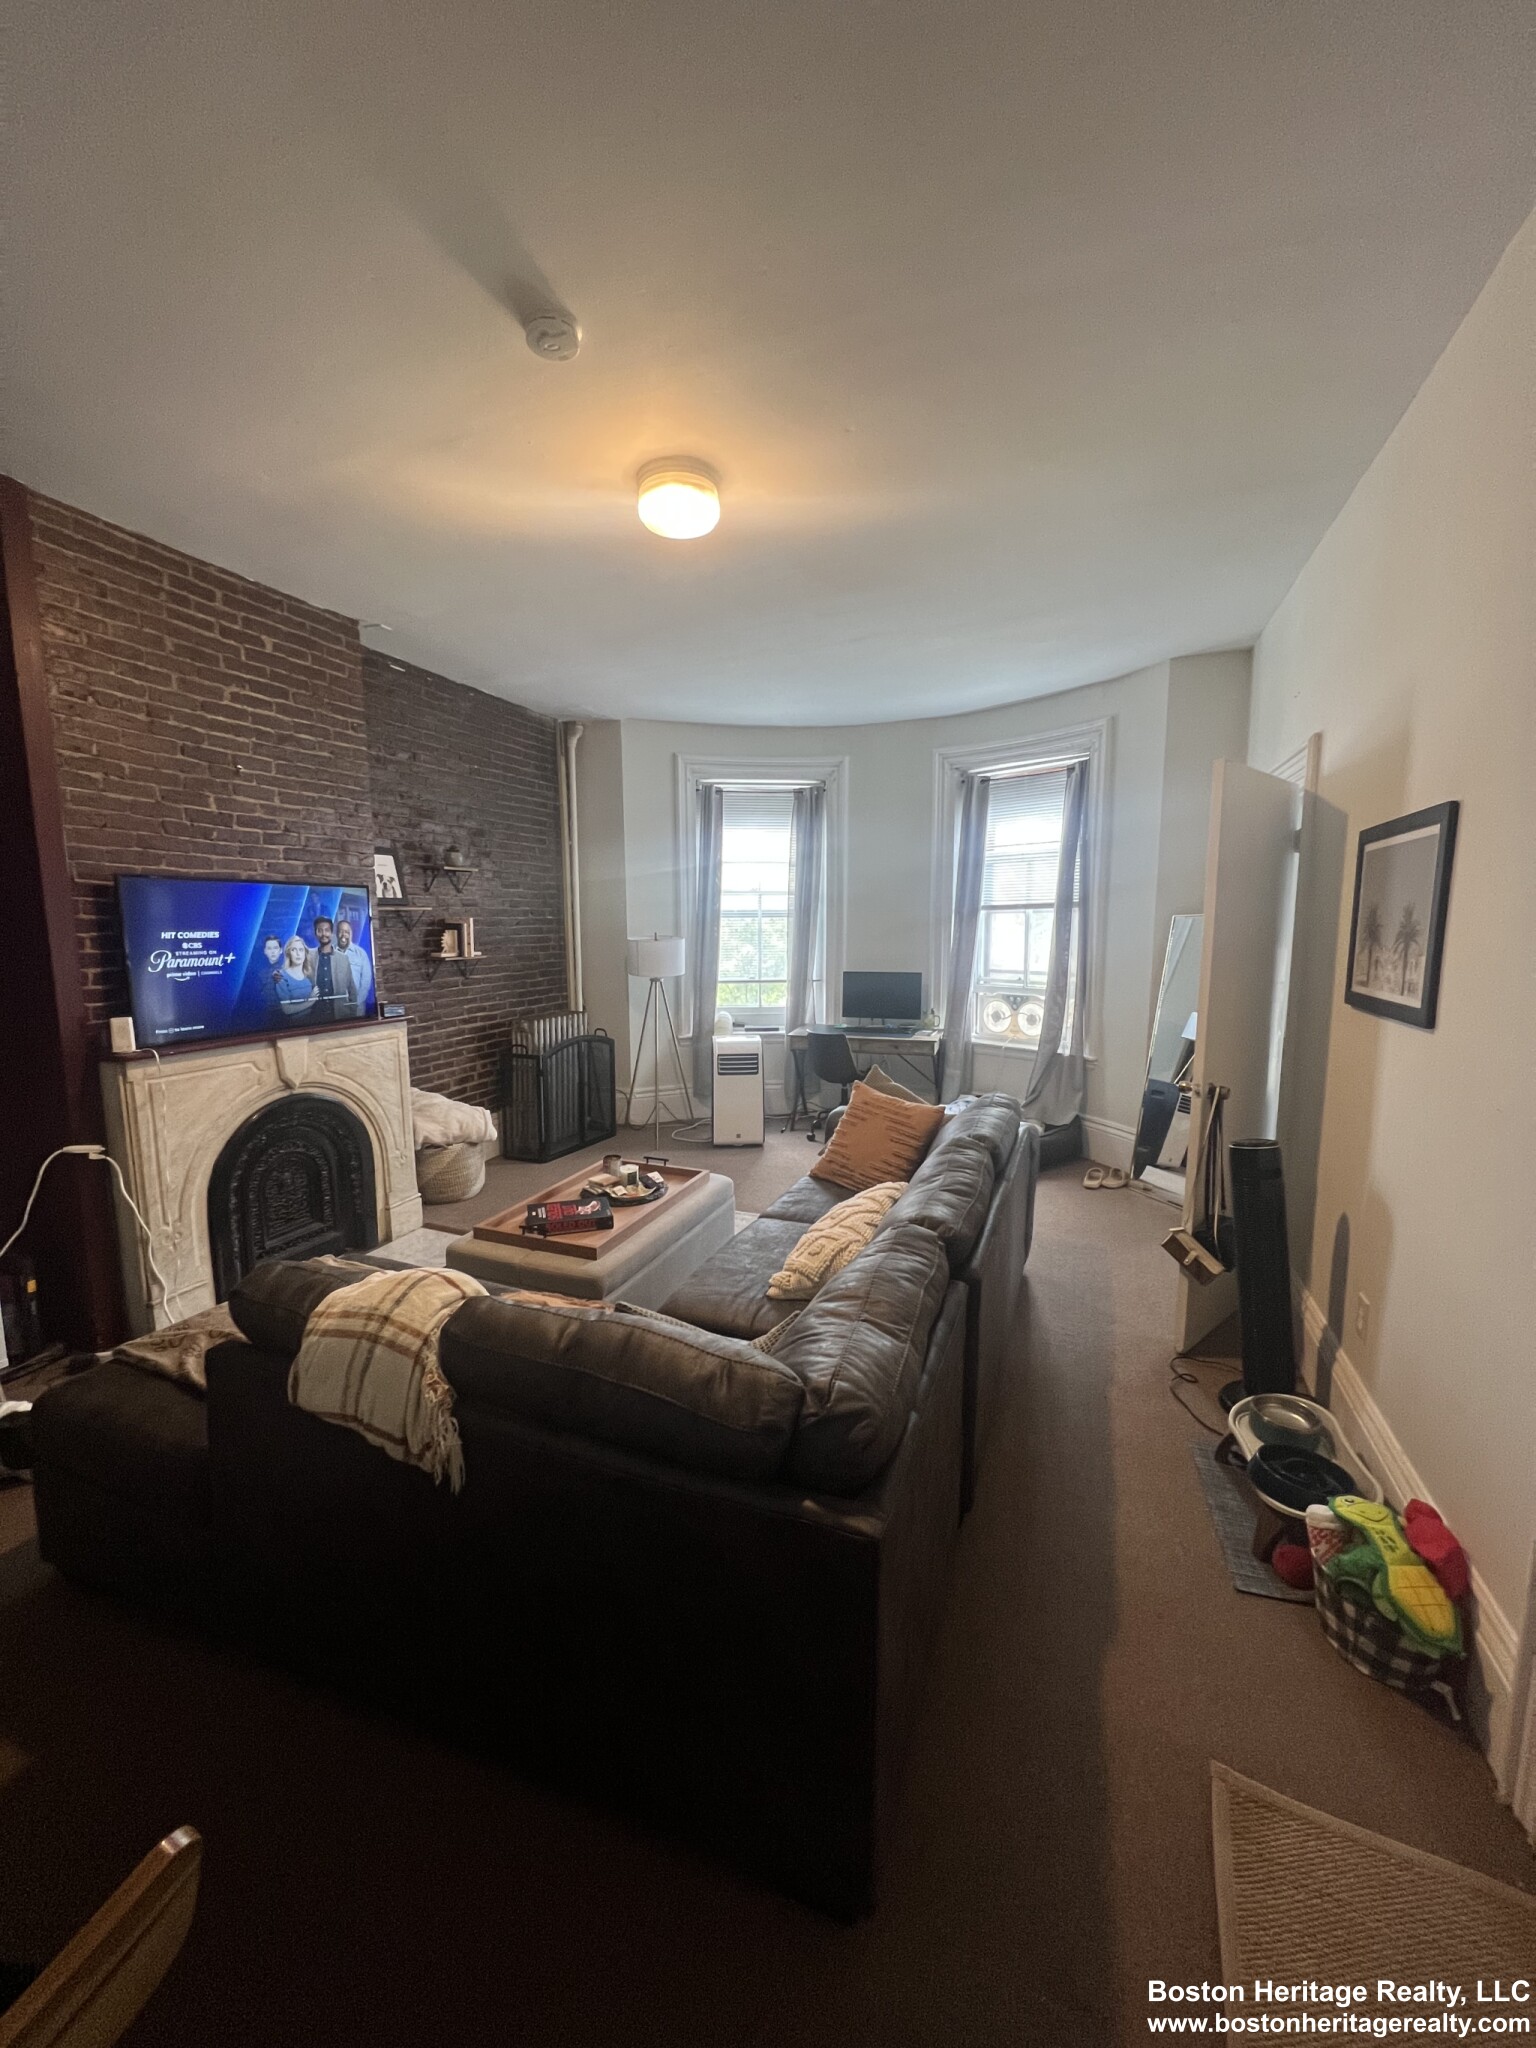 1 Bed, 1 Bath apartment in Boston, South End for $2,250